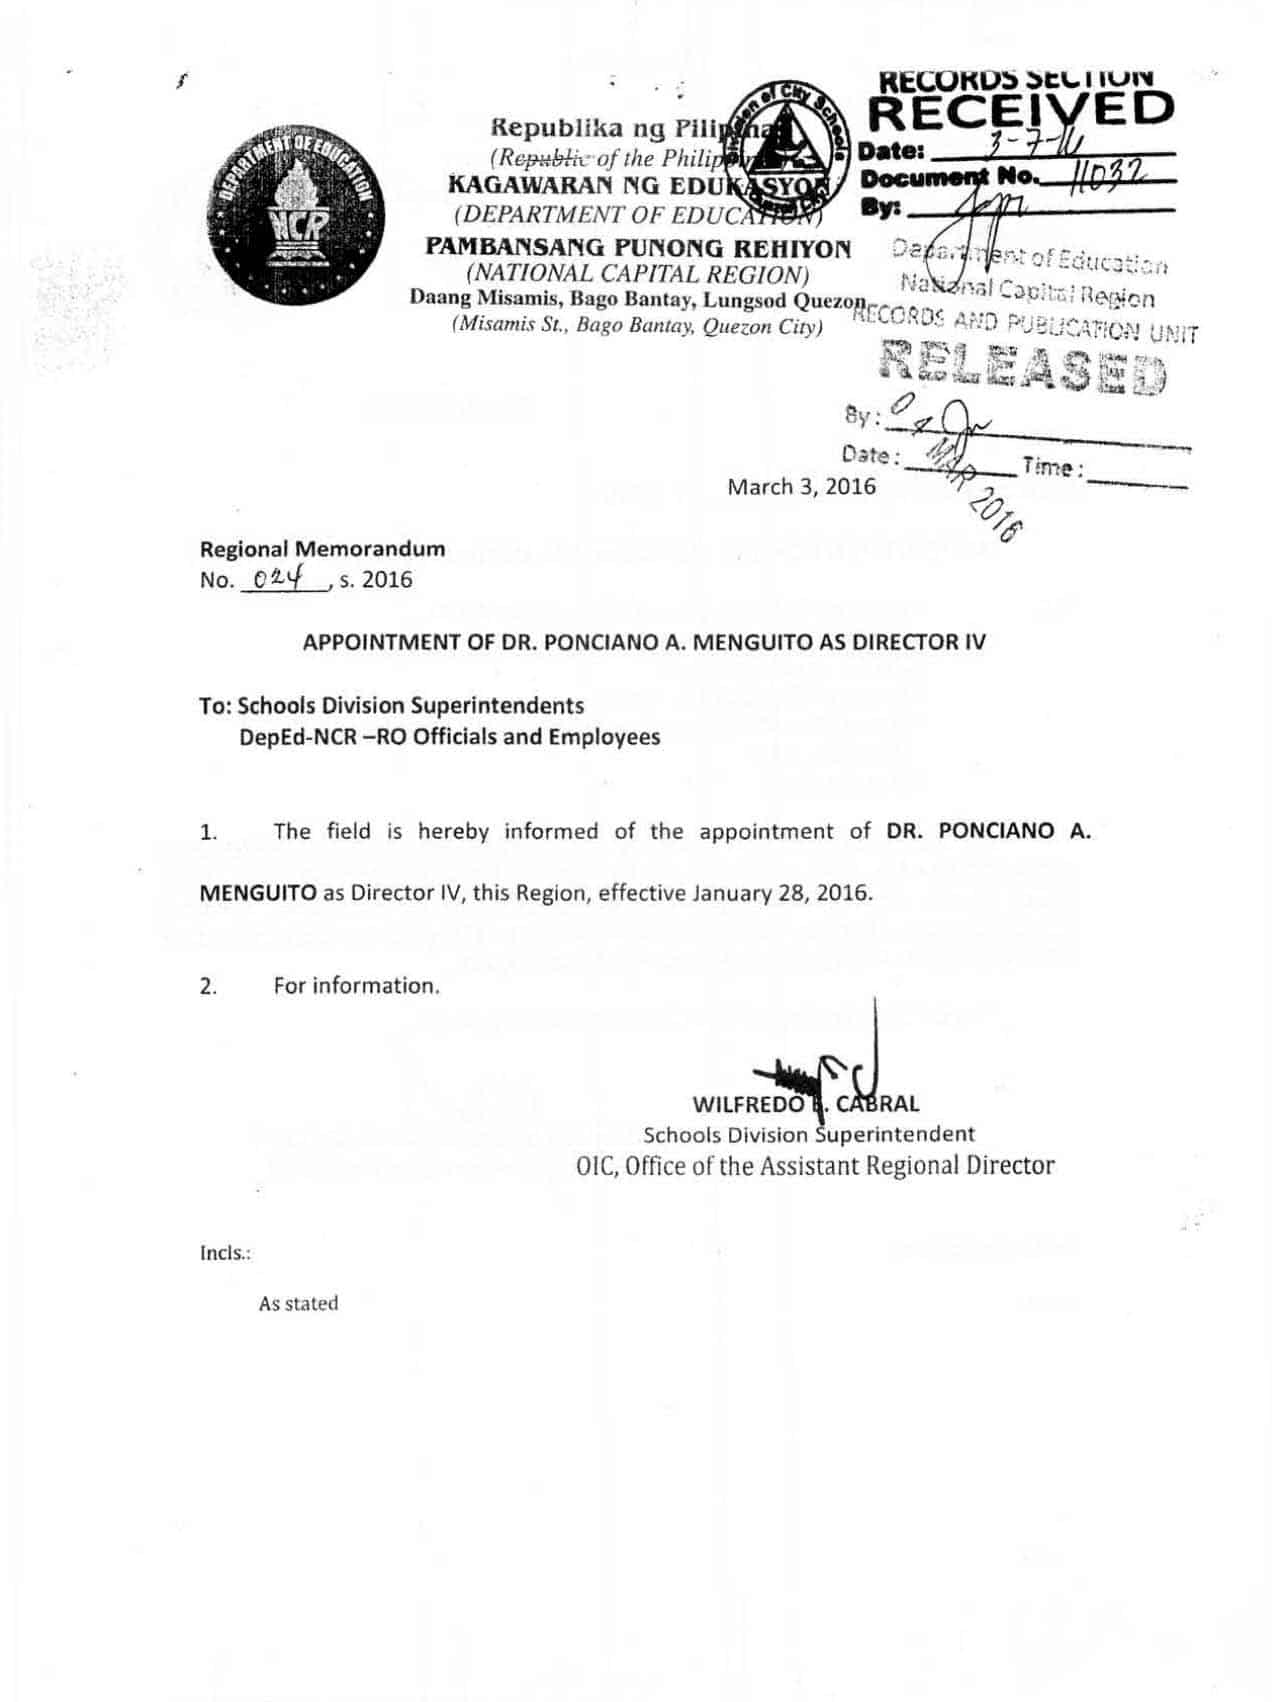 Appointment of Dr. Ponciano A. Menguito as Director IV